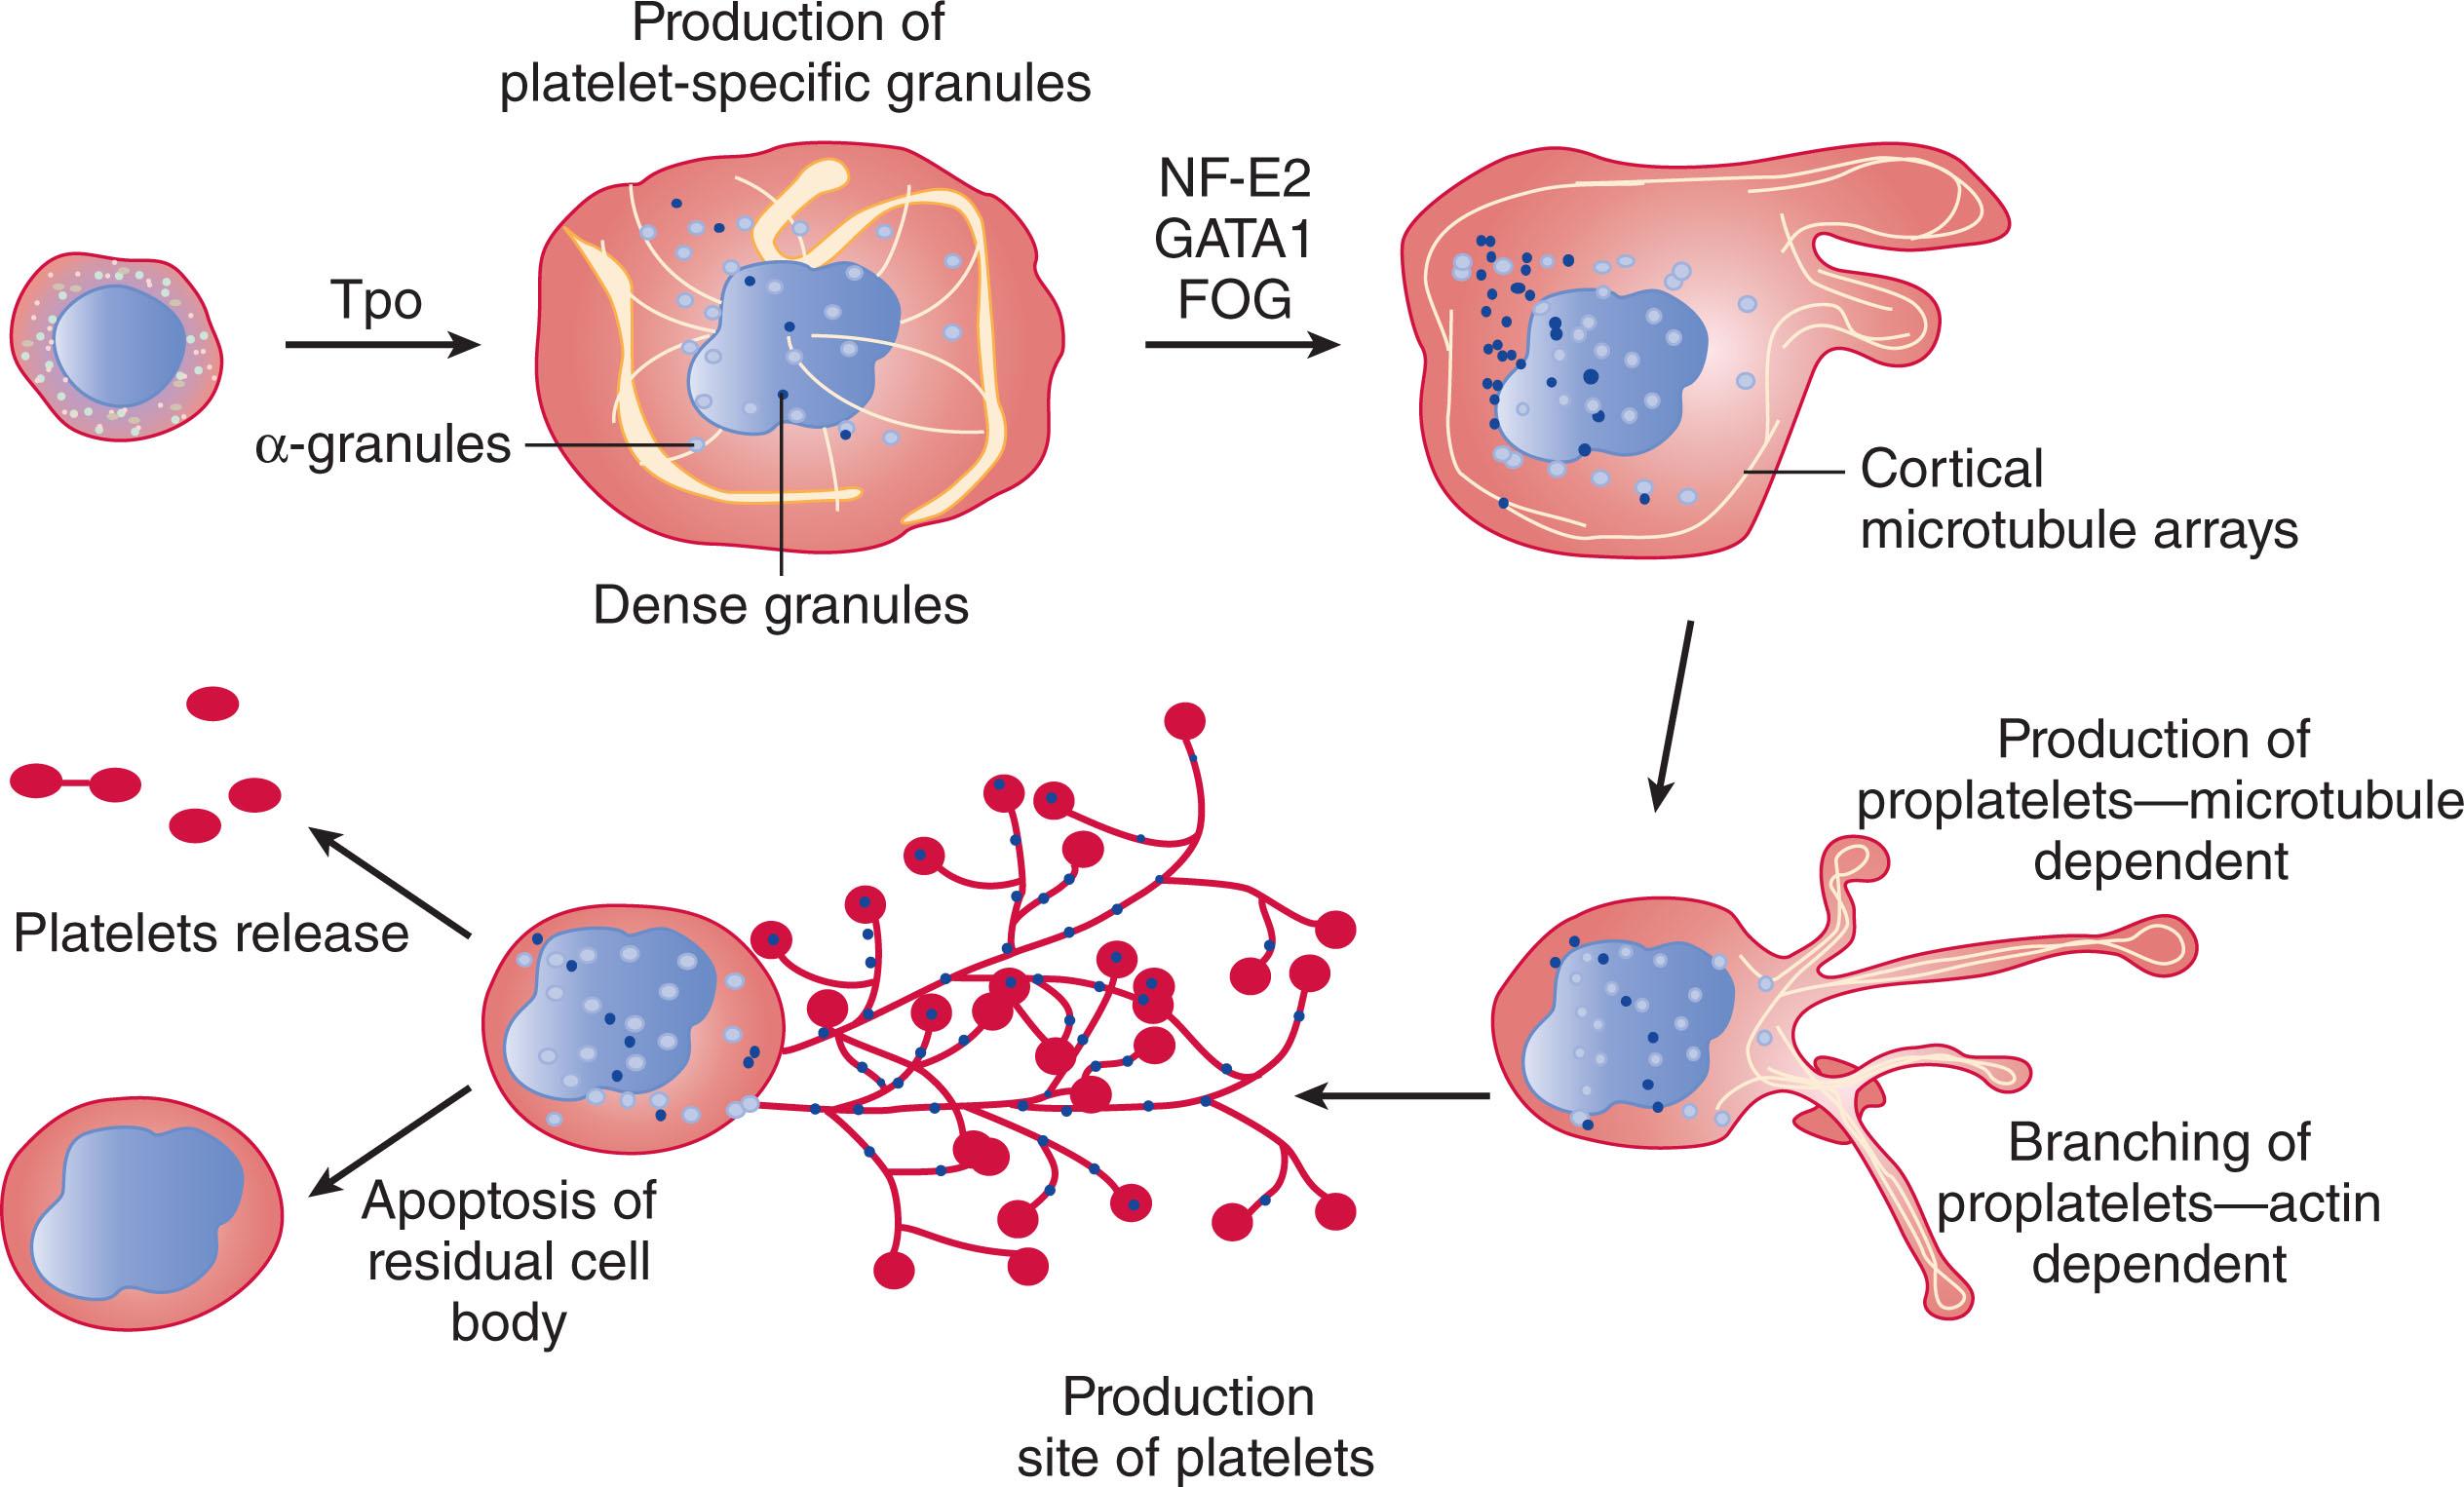 Figure 123.2, SUMMARY OF THE MAJOR EVENTS THAT LEAD TO PLATELET FORMATION AND RELEASE FROM MEGAKARYOCYTES.